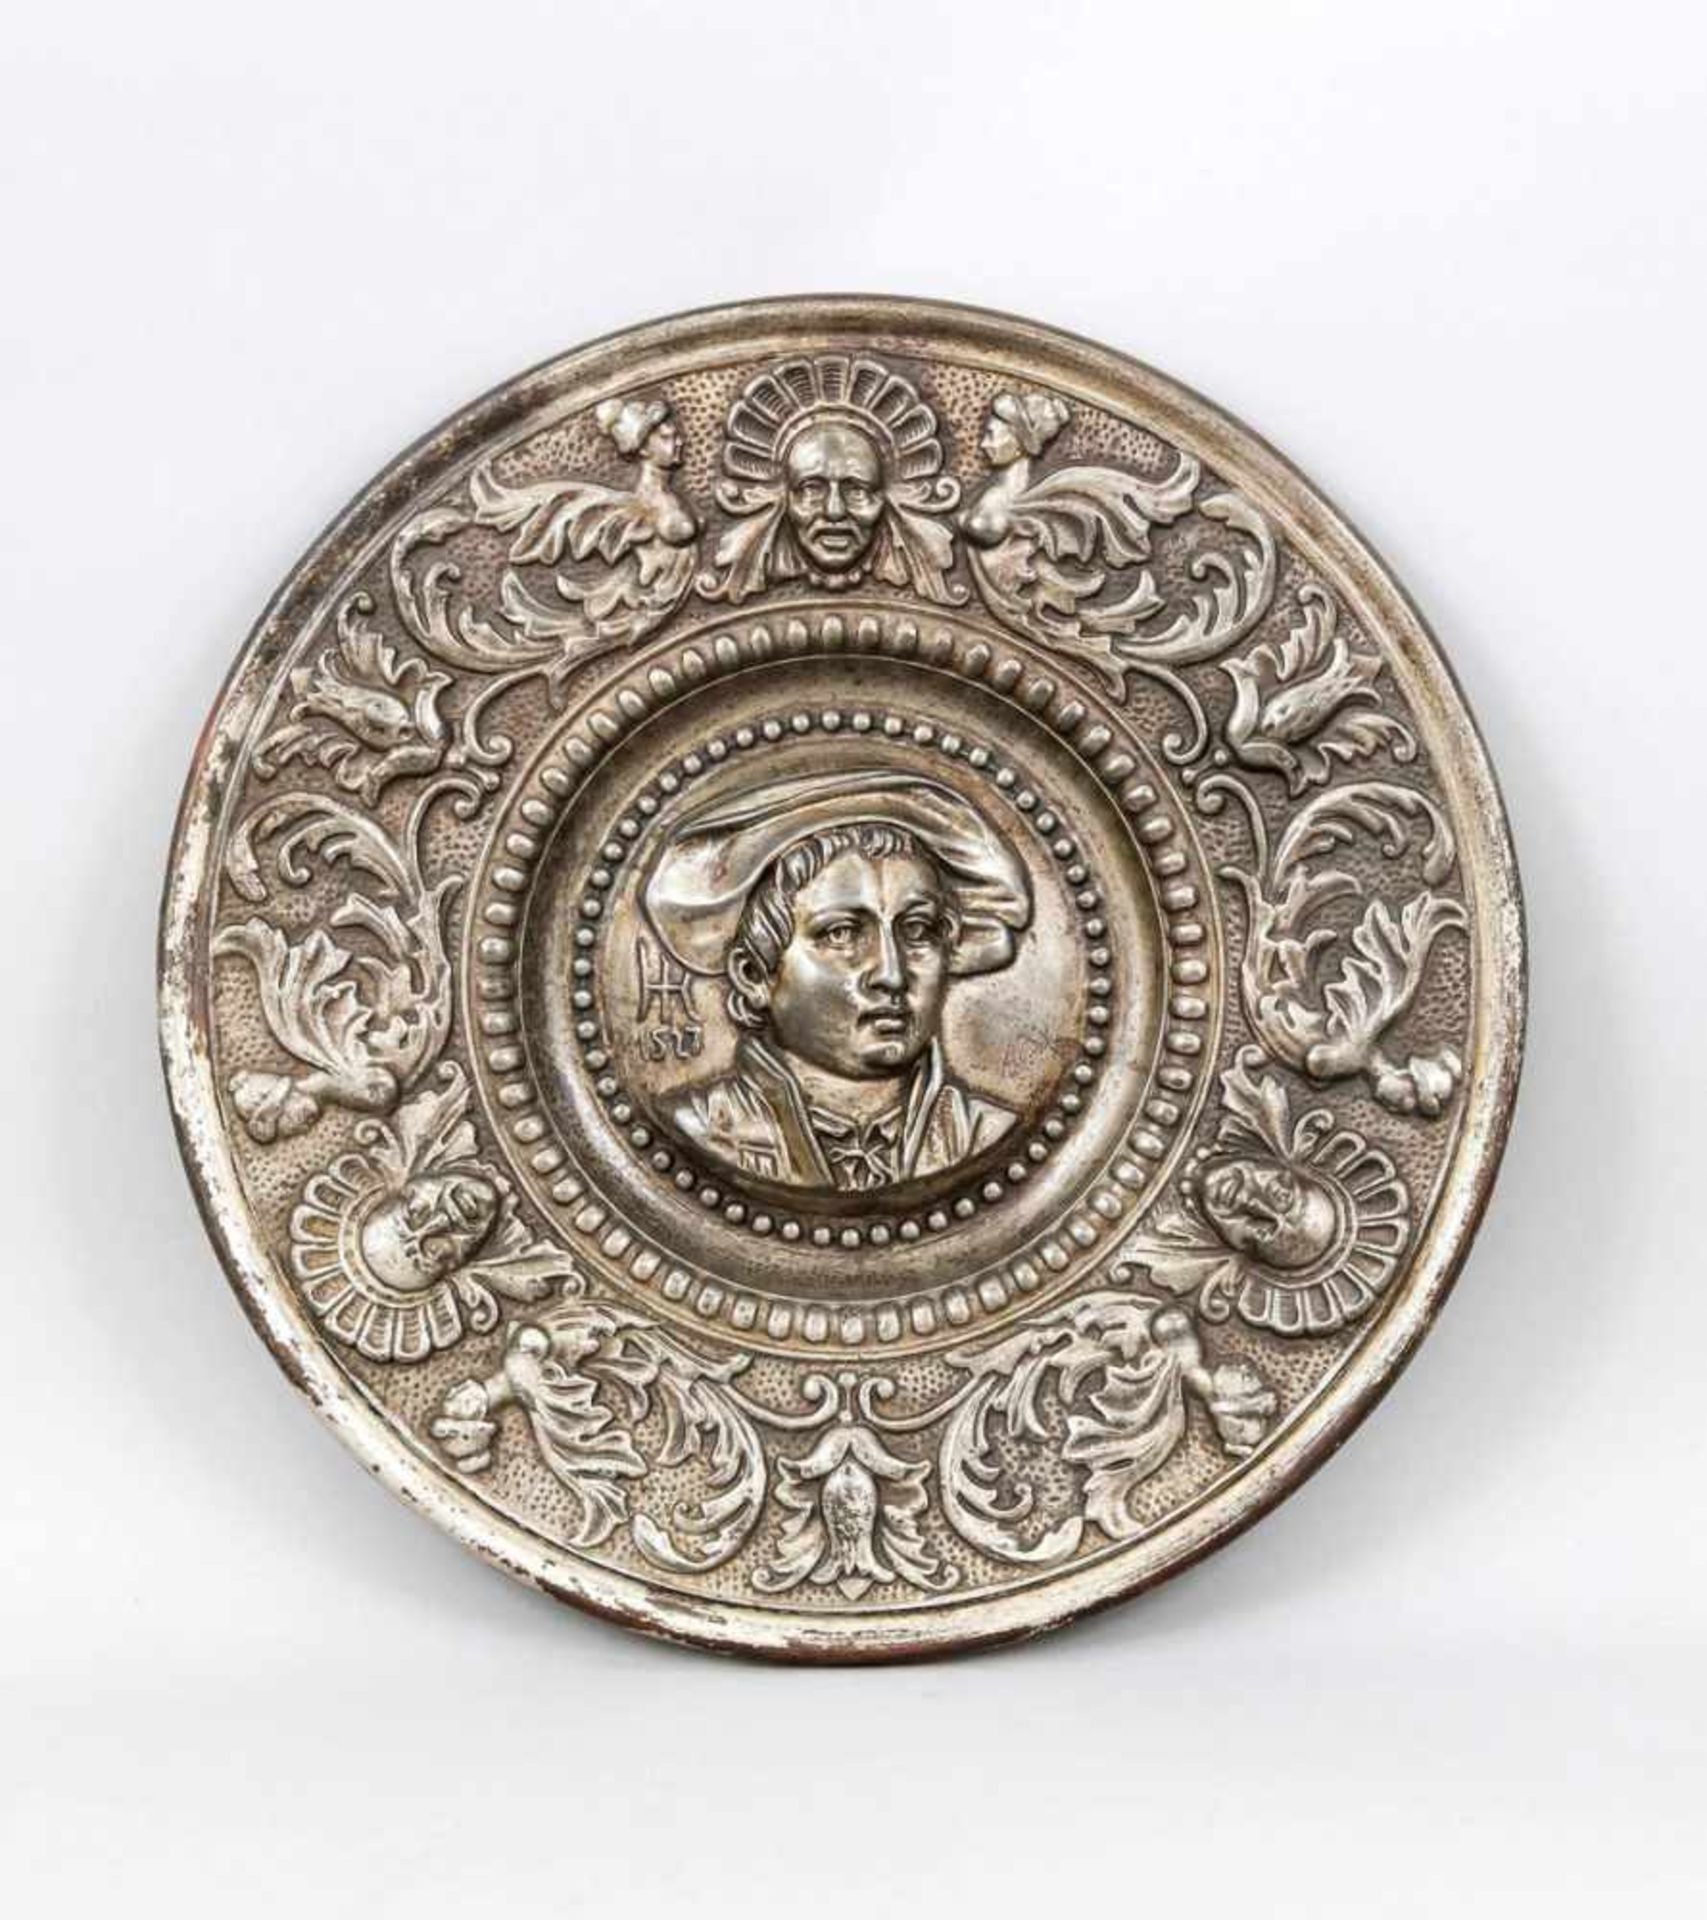 Relief plate in the Renaissance style, late 19th century, cast iron, silver-colored, flatplate on